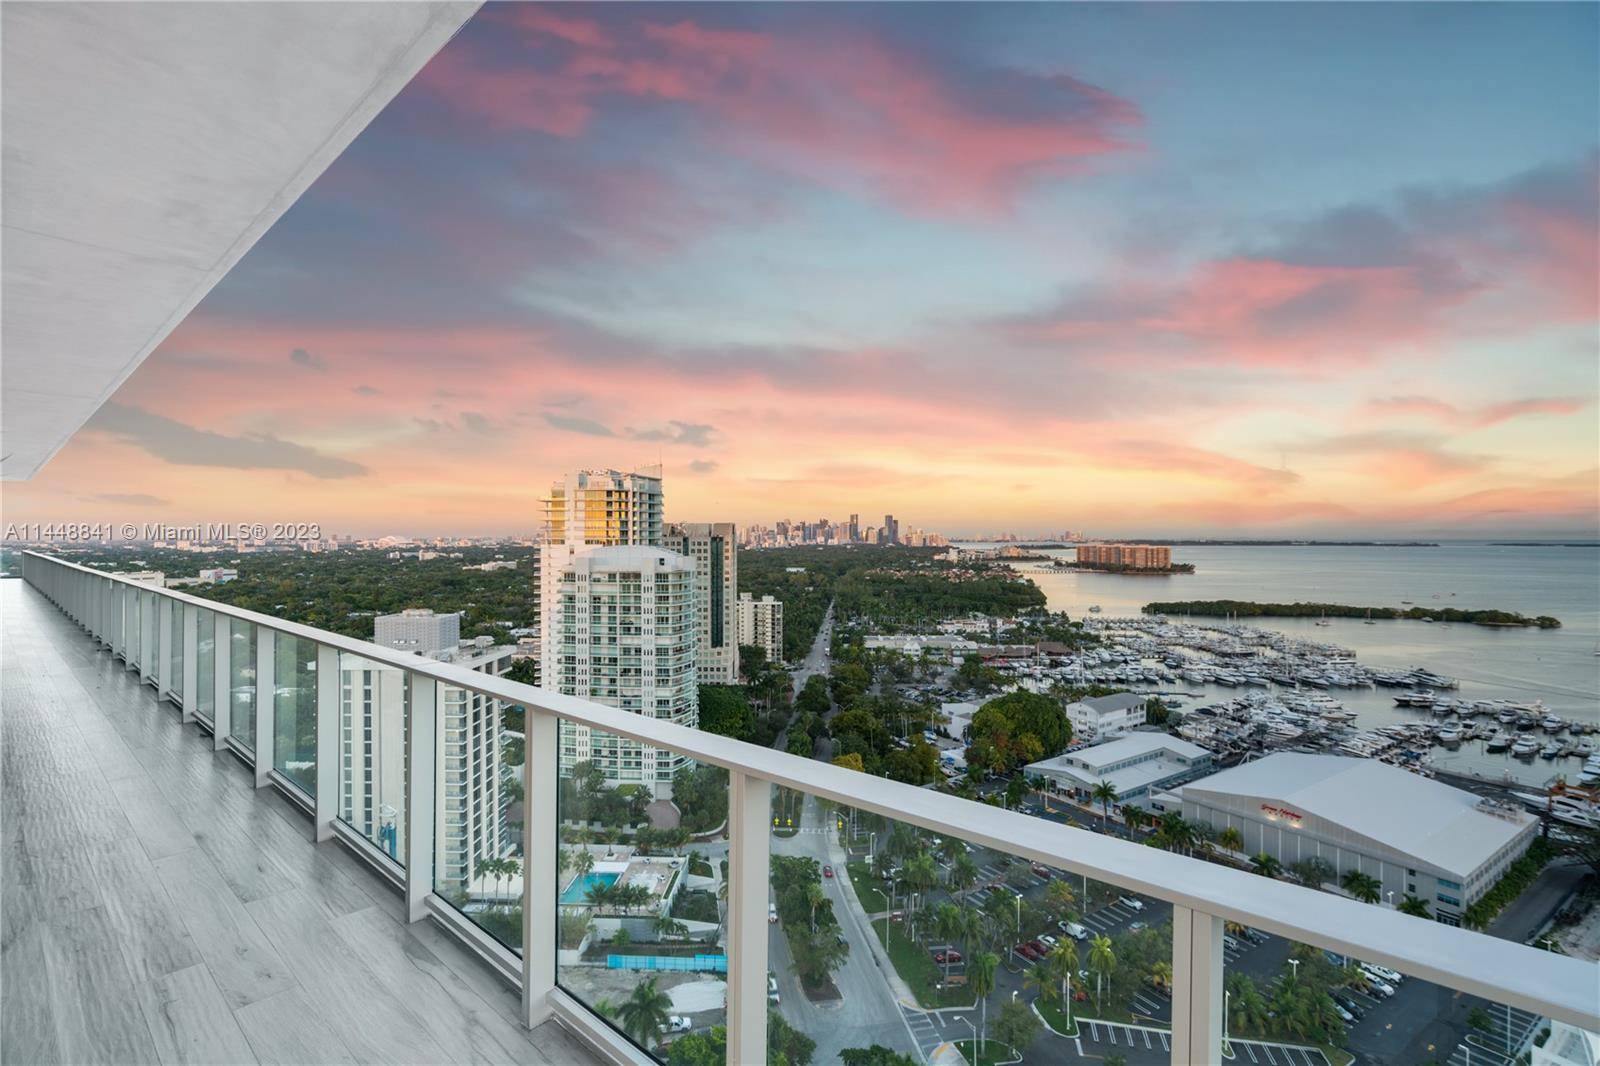 In the heart of Coconut Grove, footsteps away from couture shopping and exquisite dining sits this magnificent, fully furnished 10, 180 square foot penthouse in the sky.